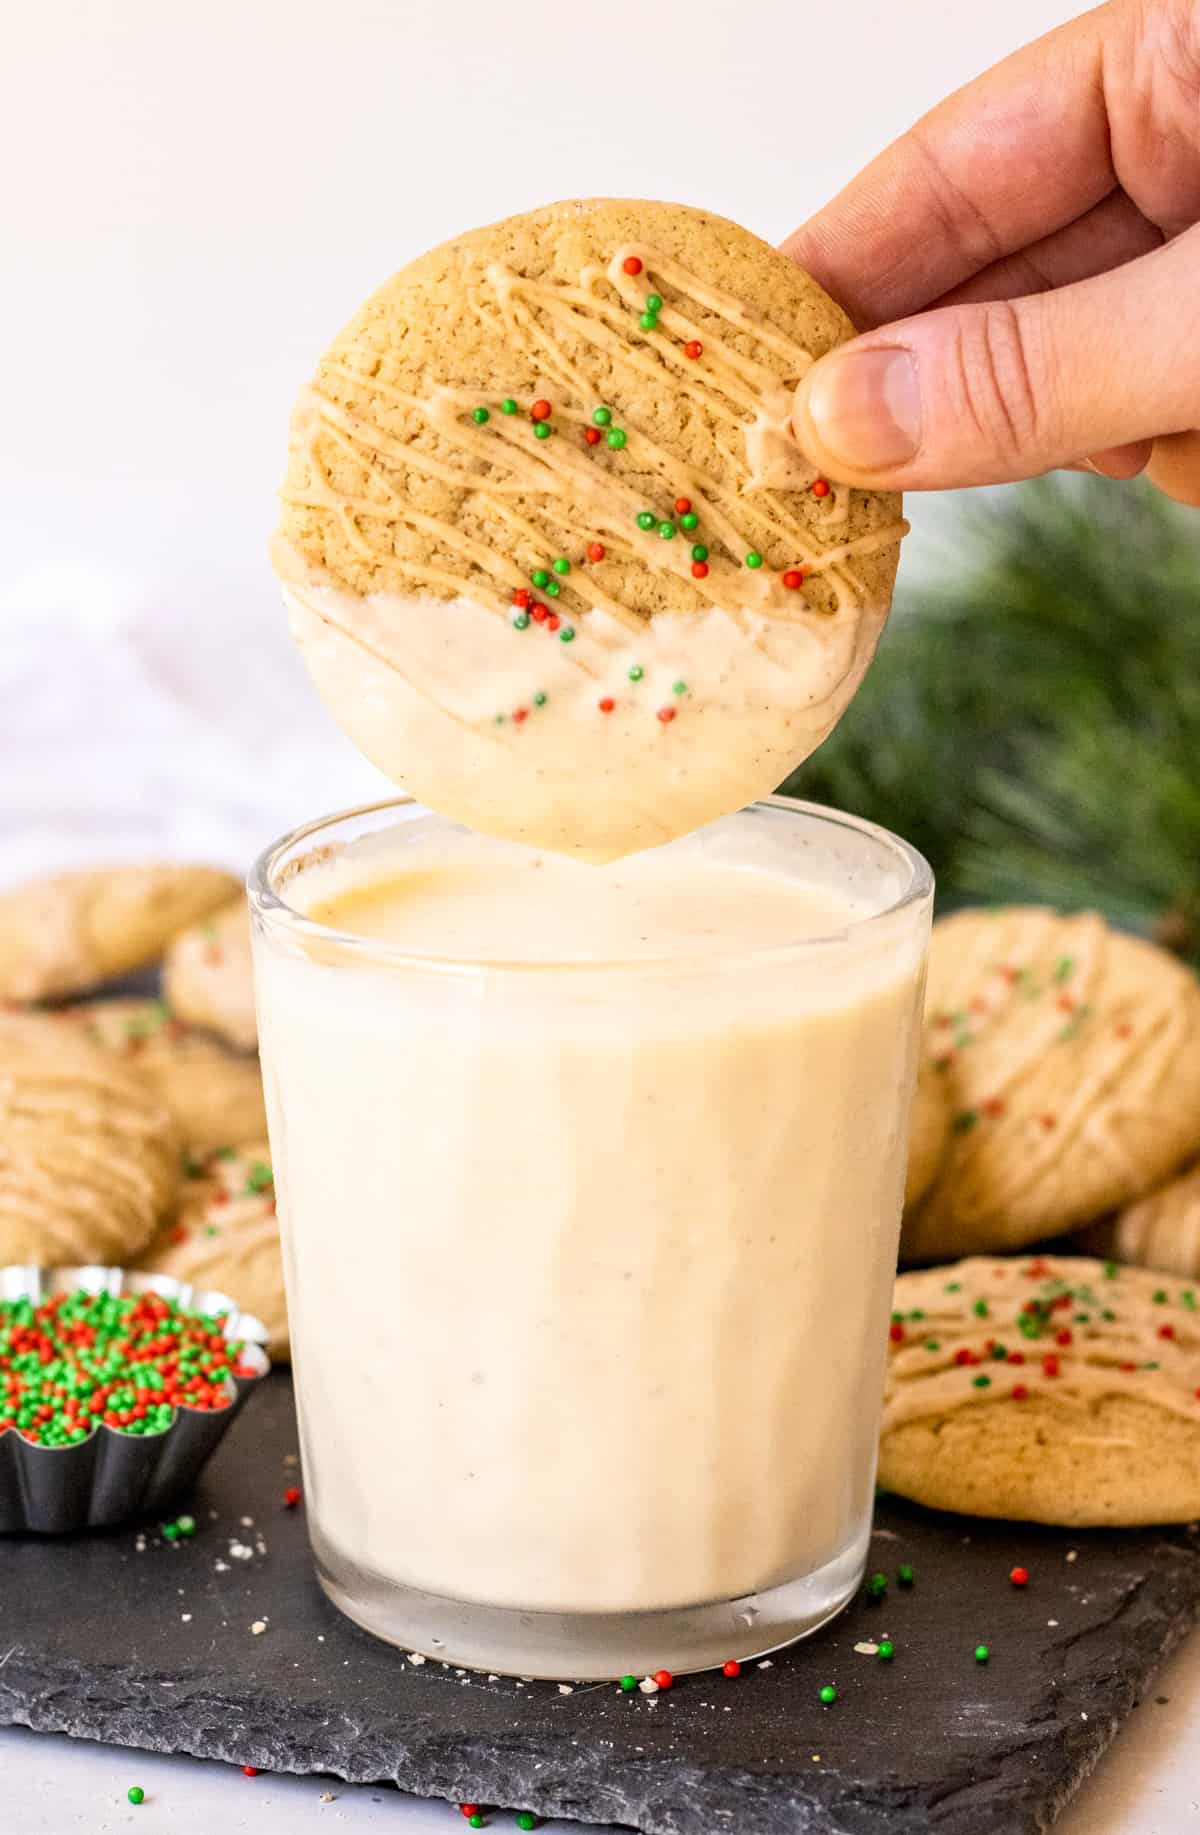 Hand dipping one cookie in eggnog.